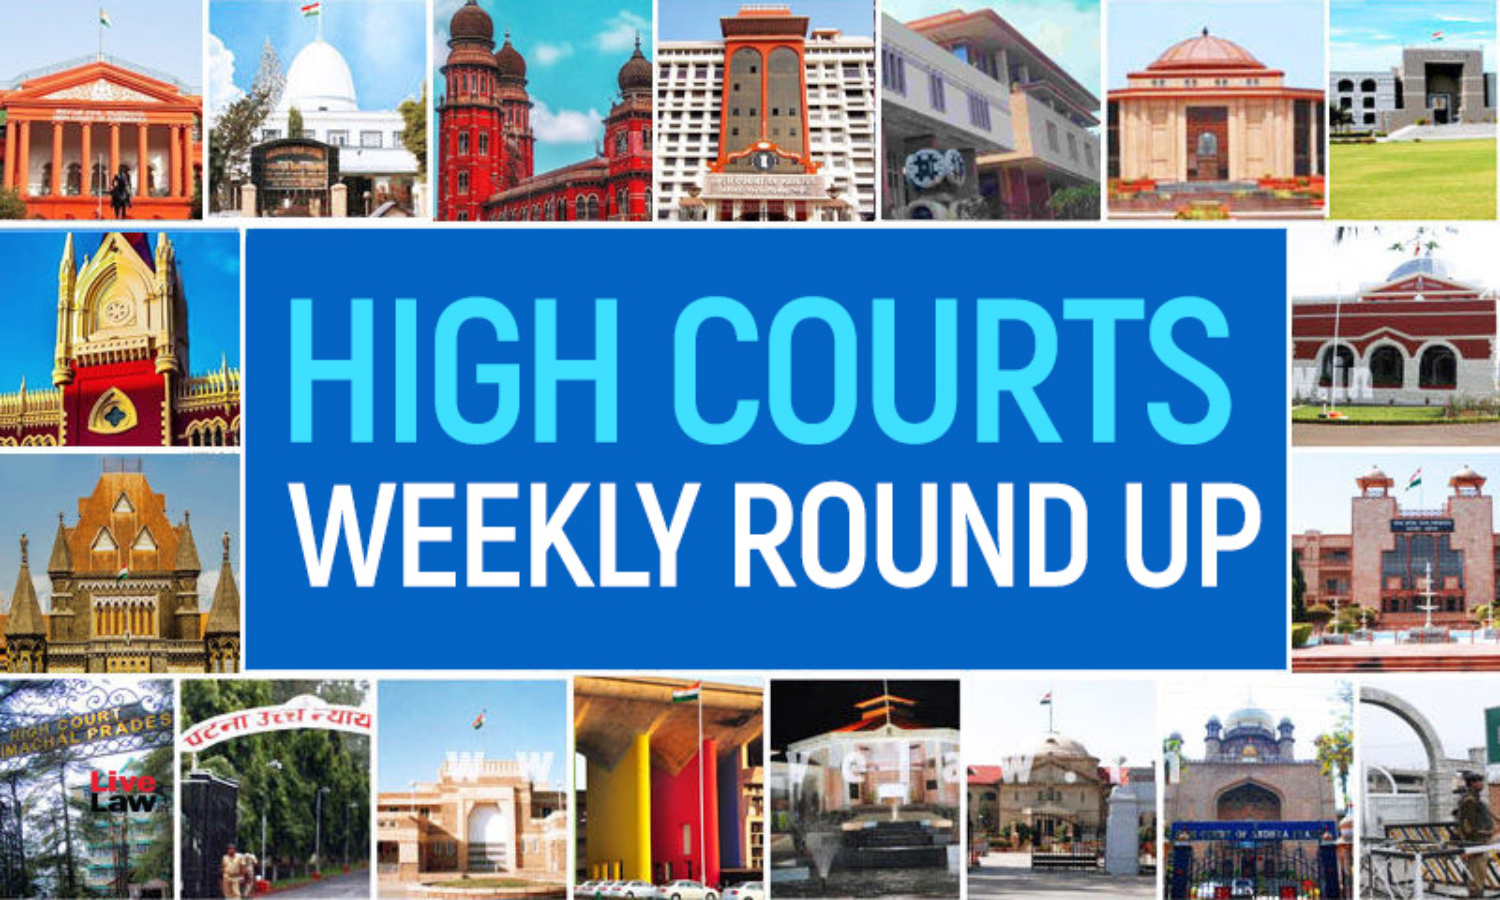 Hd Xxvi Video New 2009 - All High Courts Weekly Round Up [18 July 2022 - 24 July 2022]